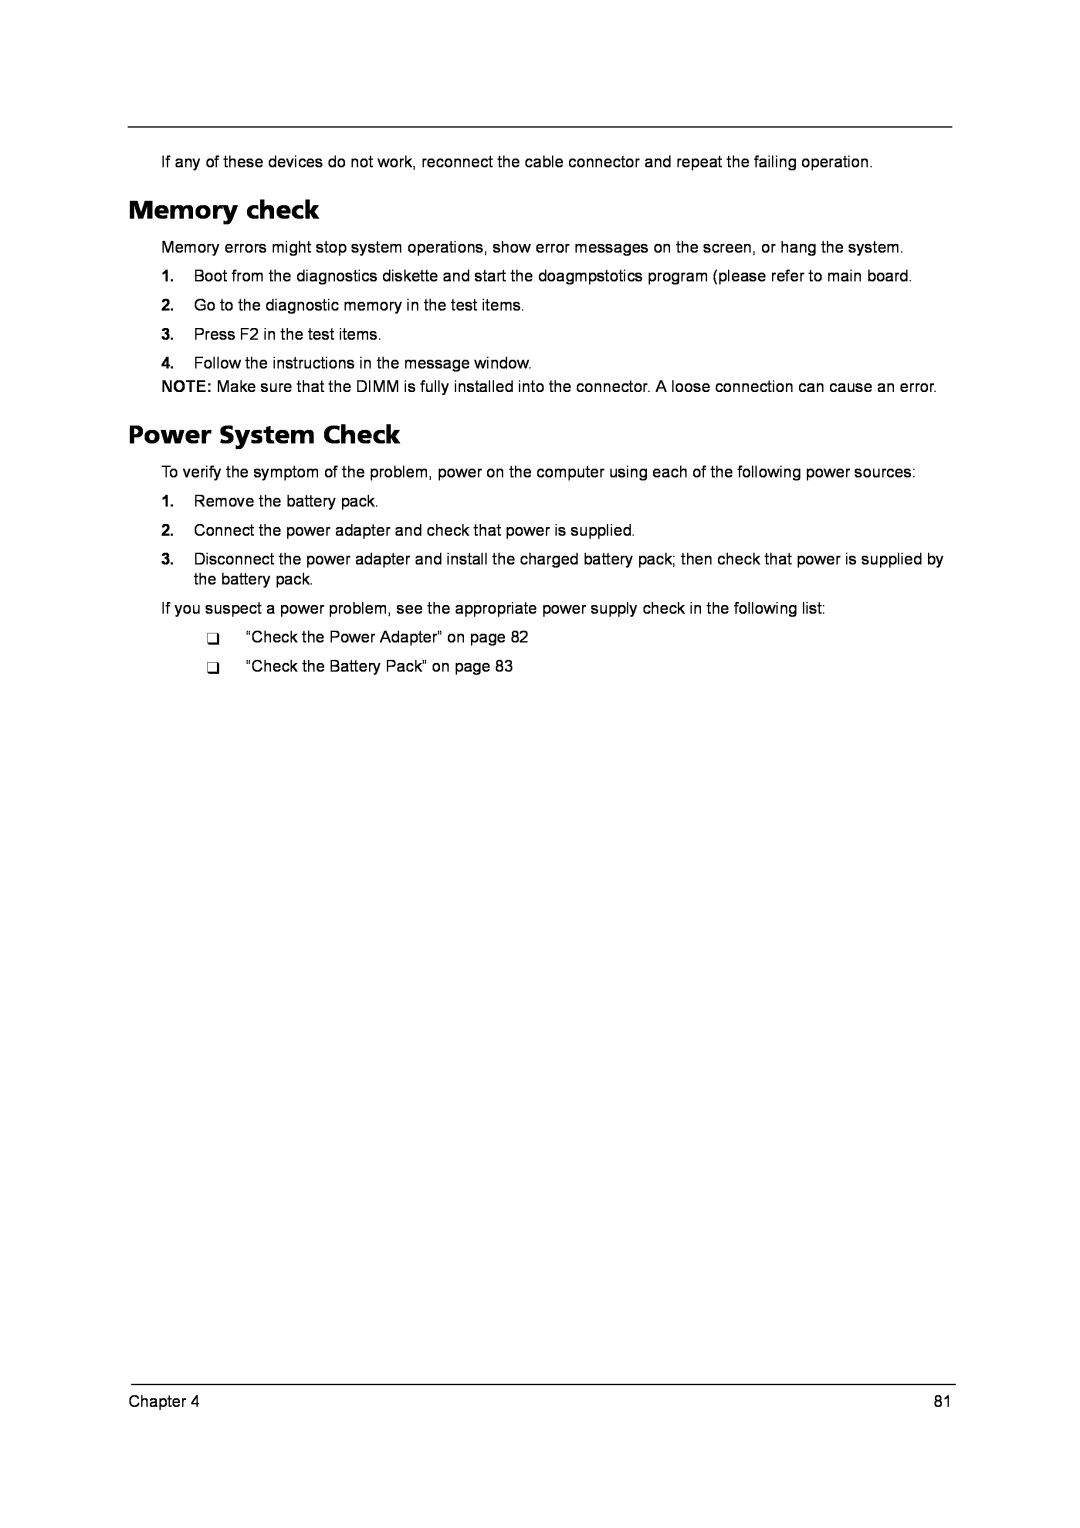 Acer 9800 manual Memory check, Power System Check 